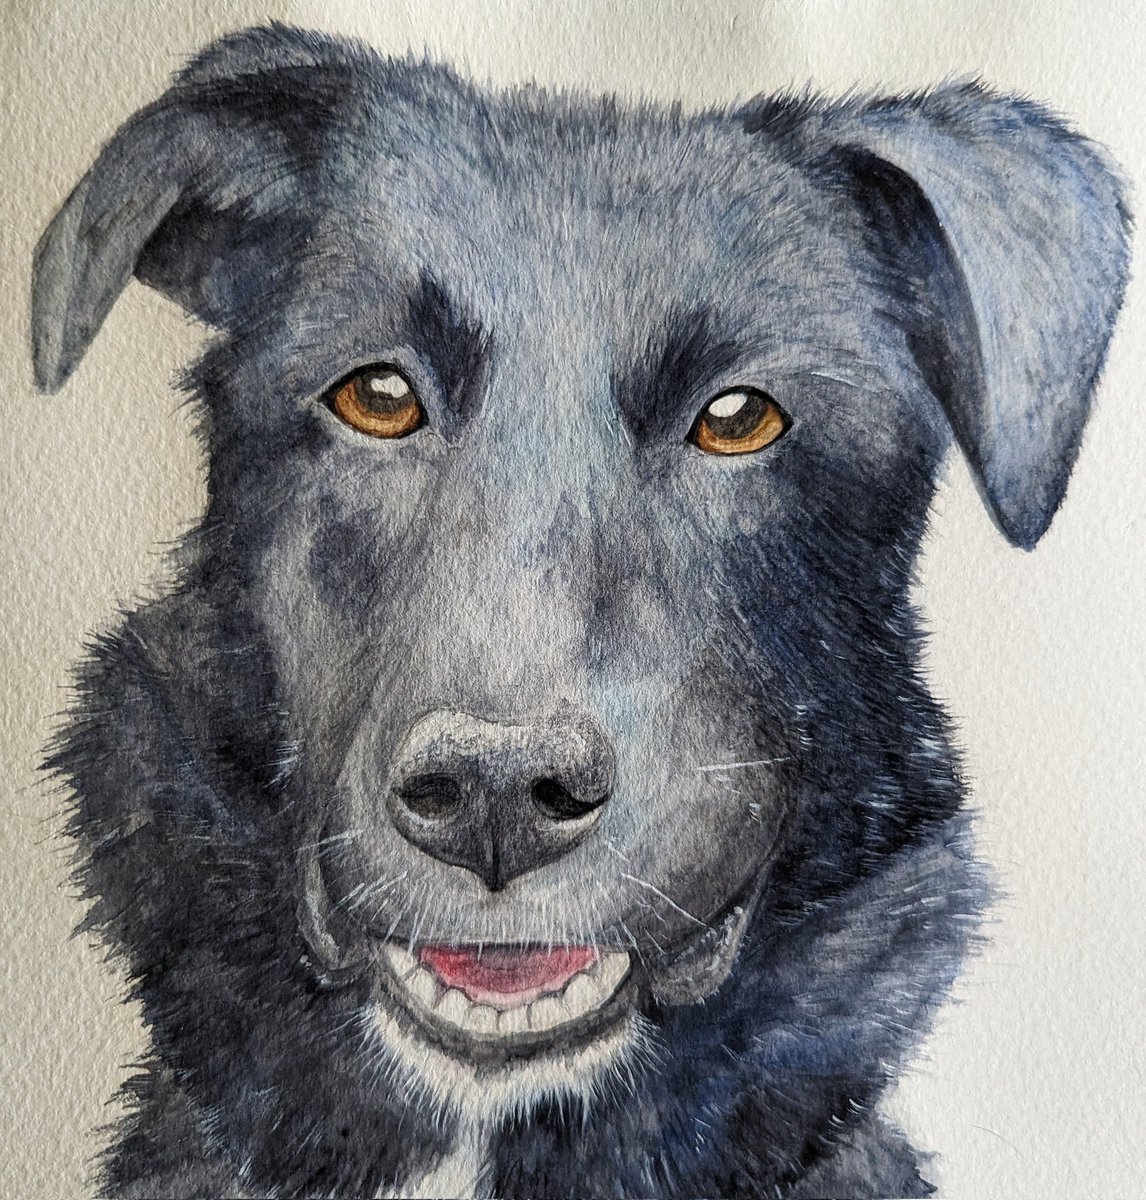 Just finished a pet portrait for one of my mom's friends of her new dog Pepper. I love doing pet portraits but I always feel an extra pressure to try and get the likeness close enough.